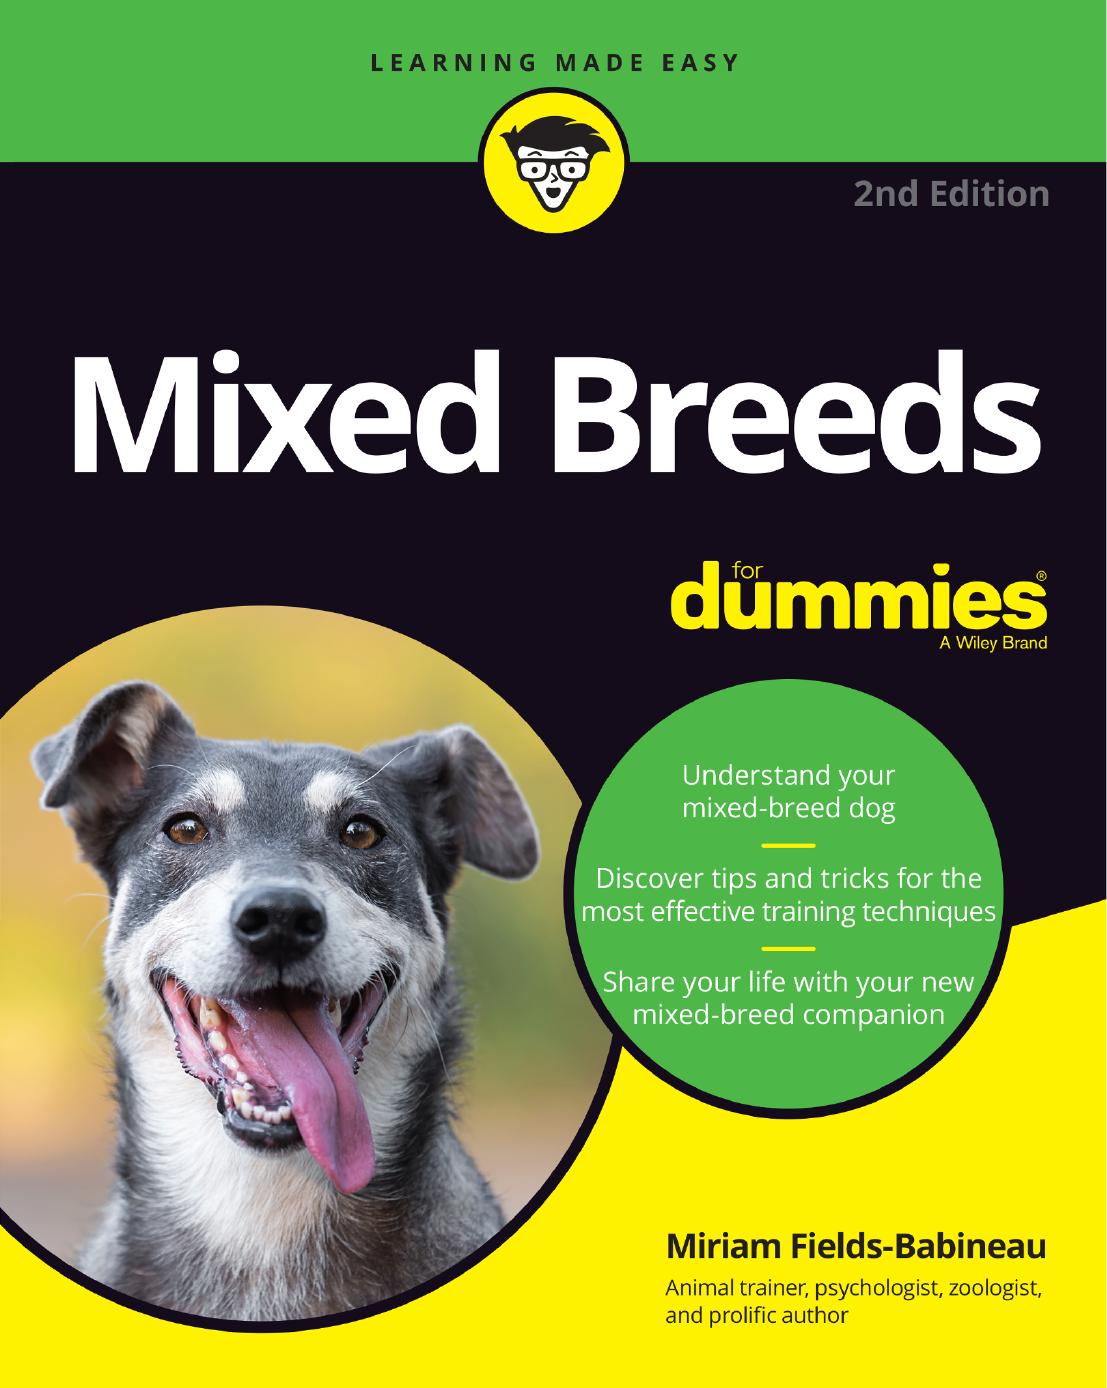 Mixed Breeds For Dummies by Miriam Fields-Babineau